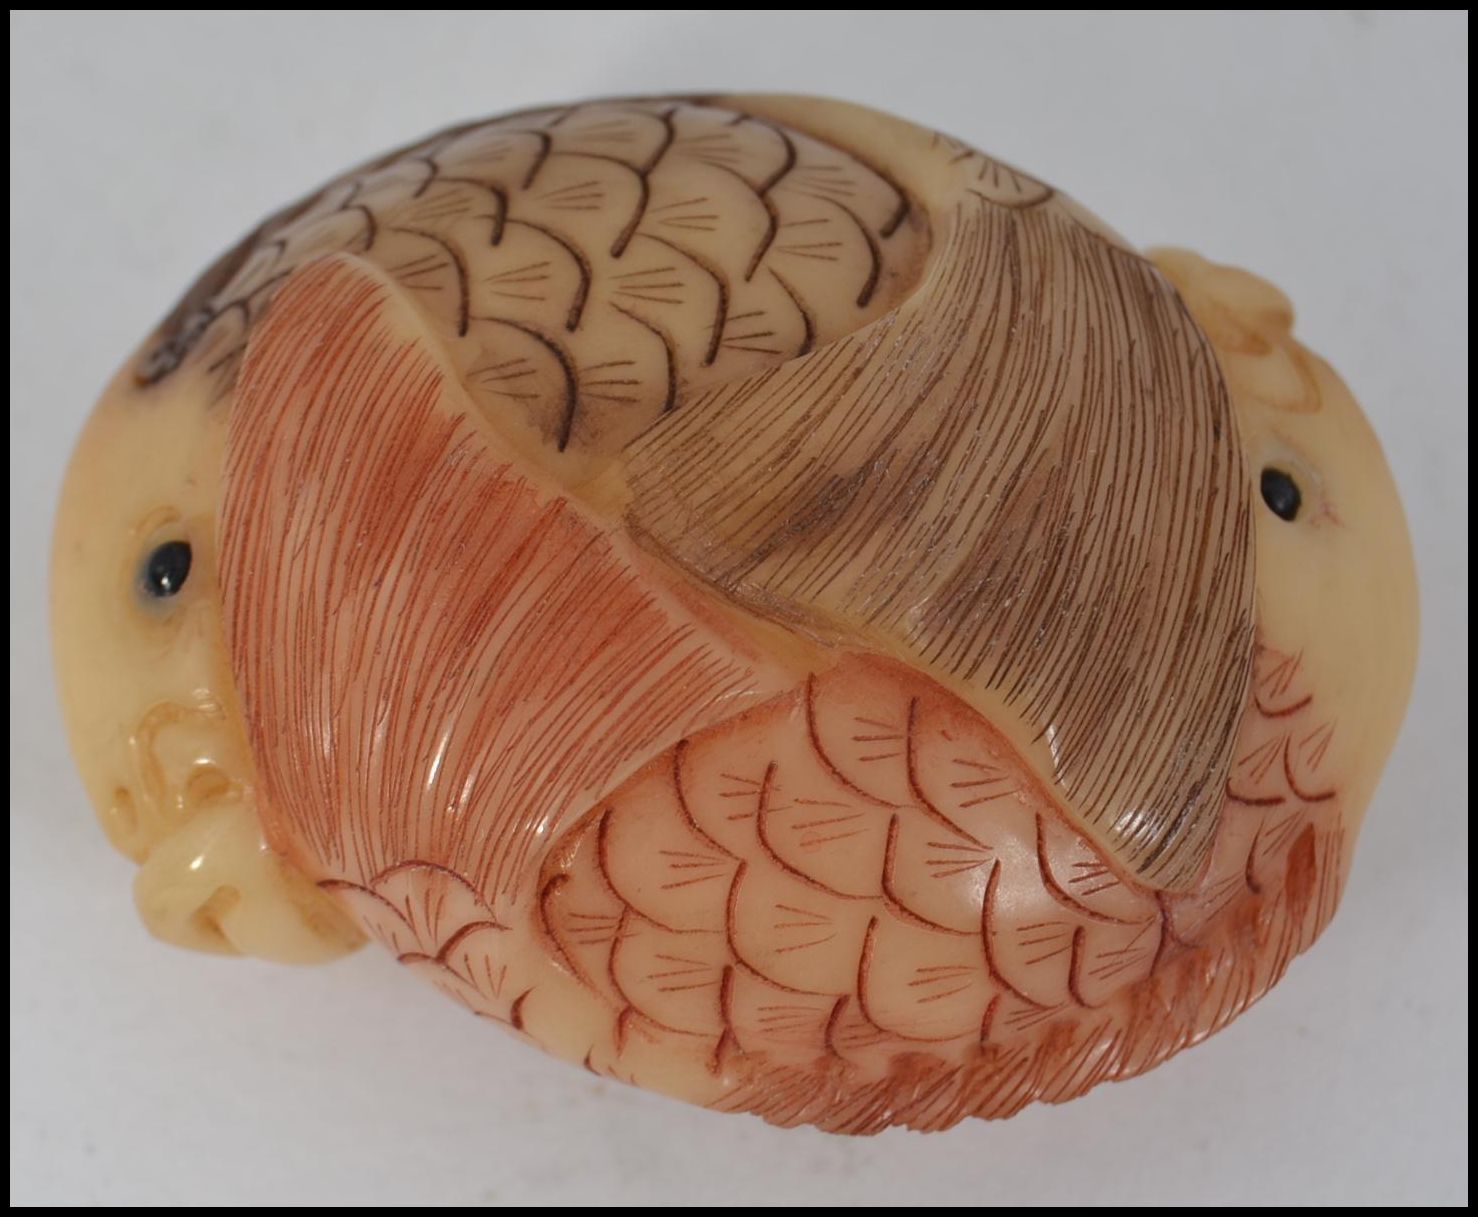 An unusual Chinese carving / netsuke type in the form of two intertwined carp fish